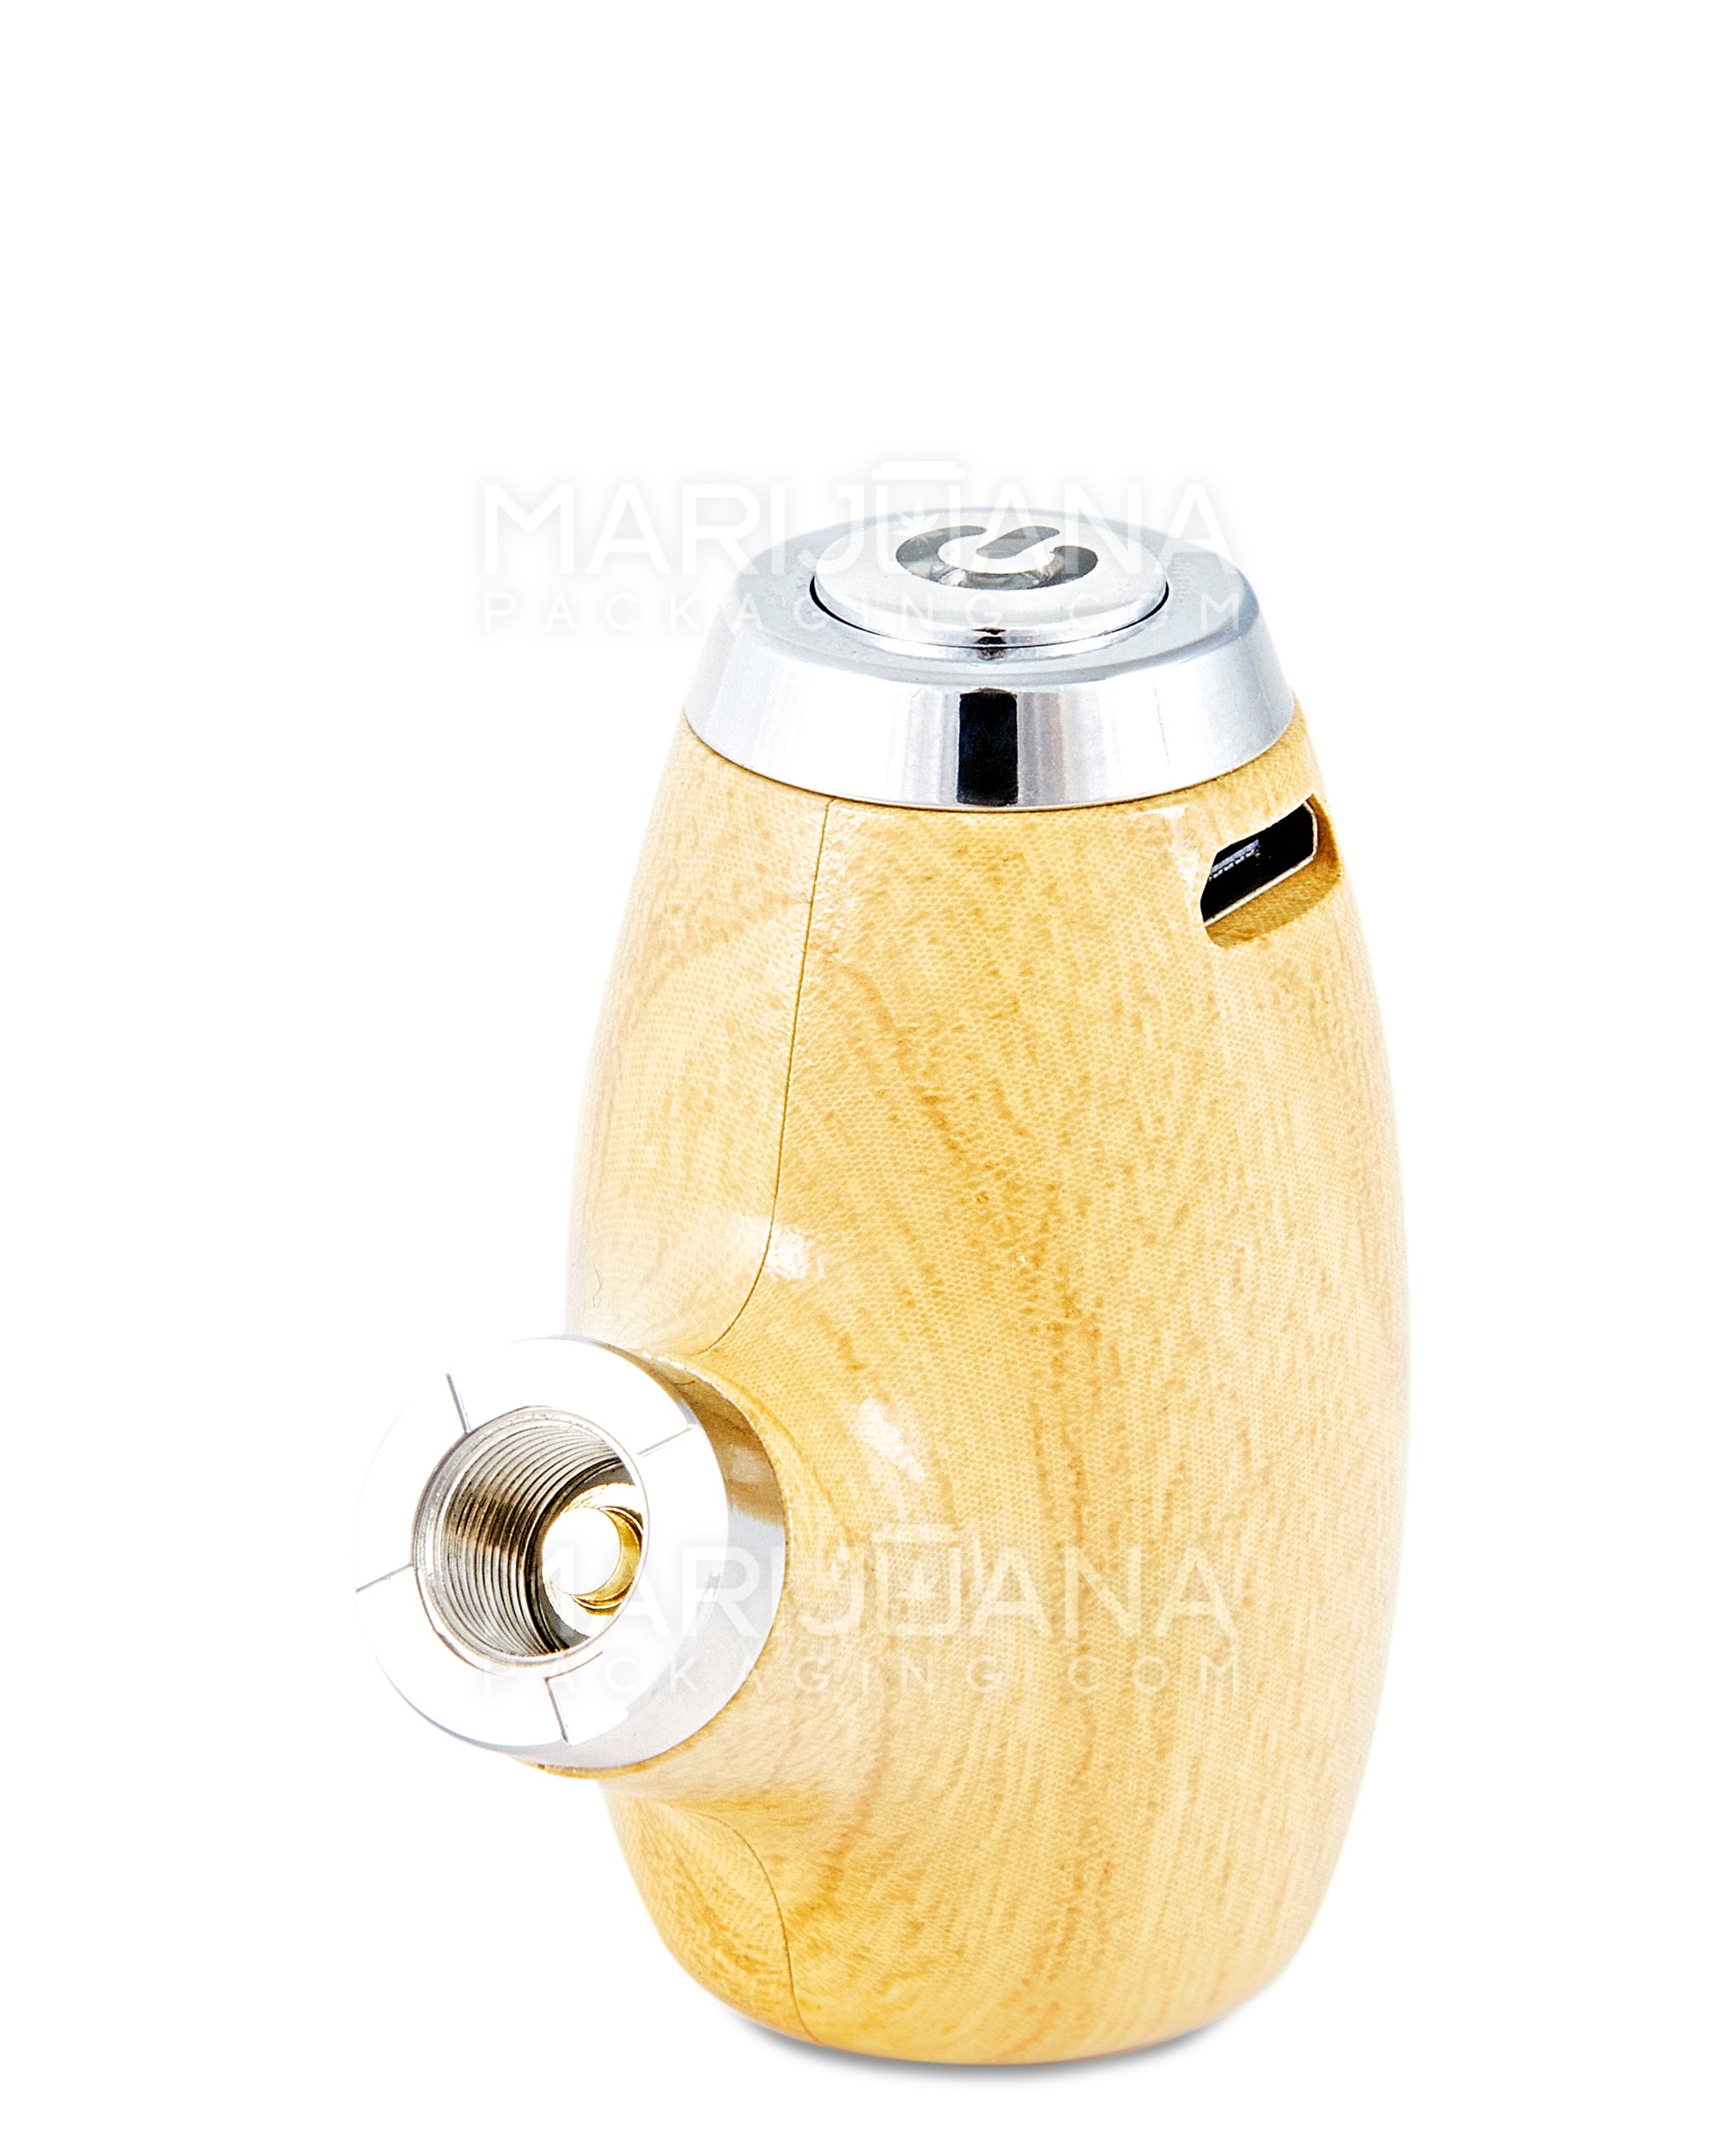 Variable Voltage "Old Man's Pipe" Shaped Vape Cartridge Battery | 900mah - Spruce Wood - 510 Thread - 2